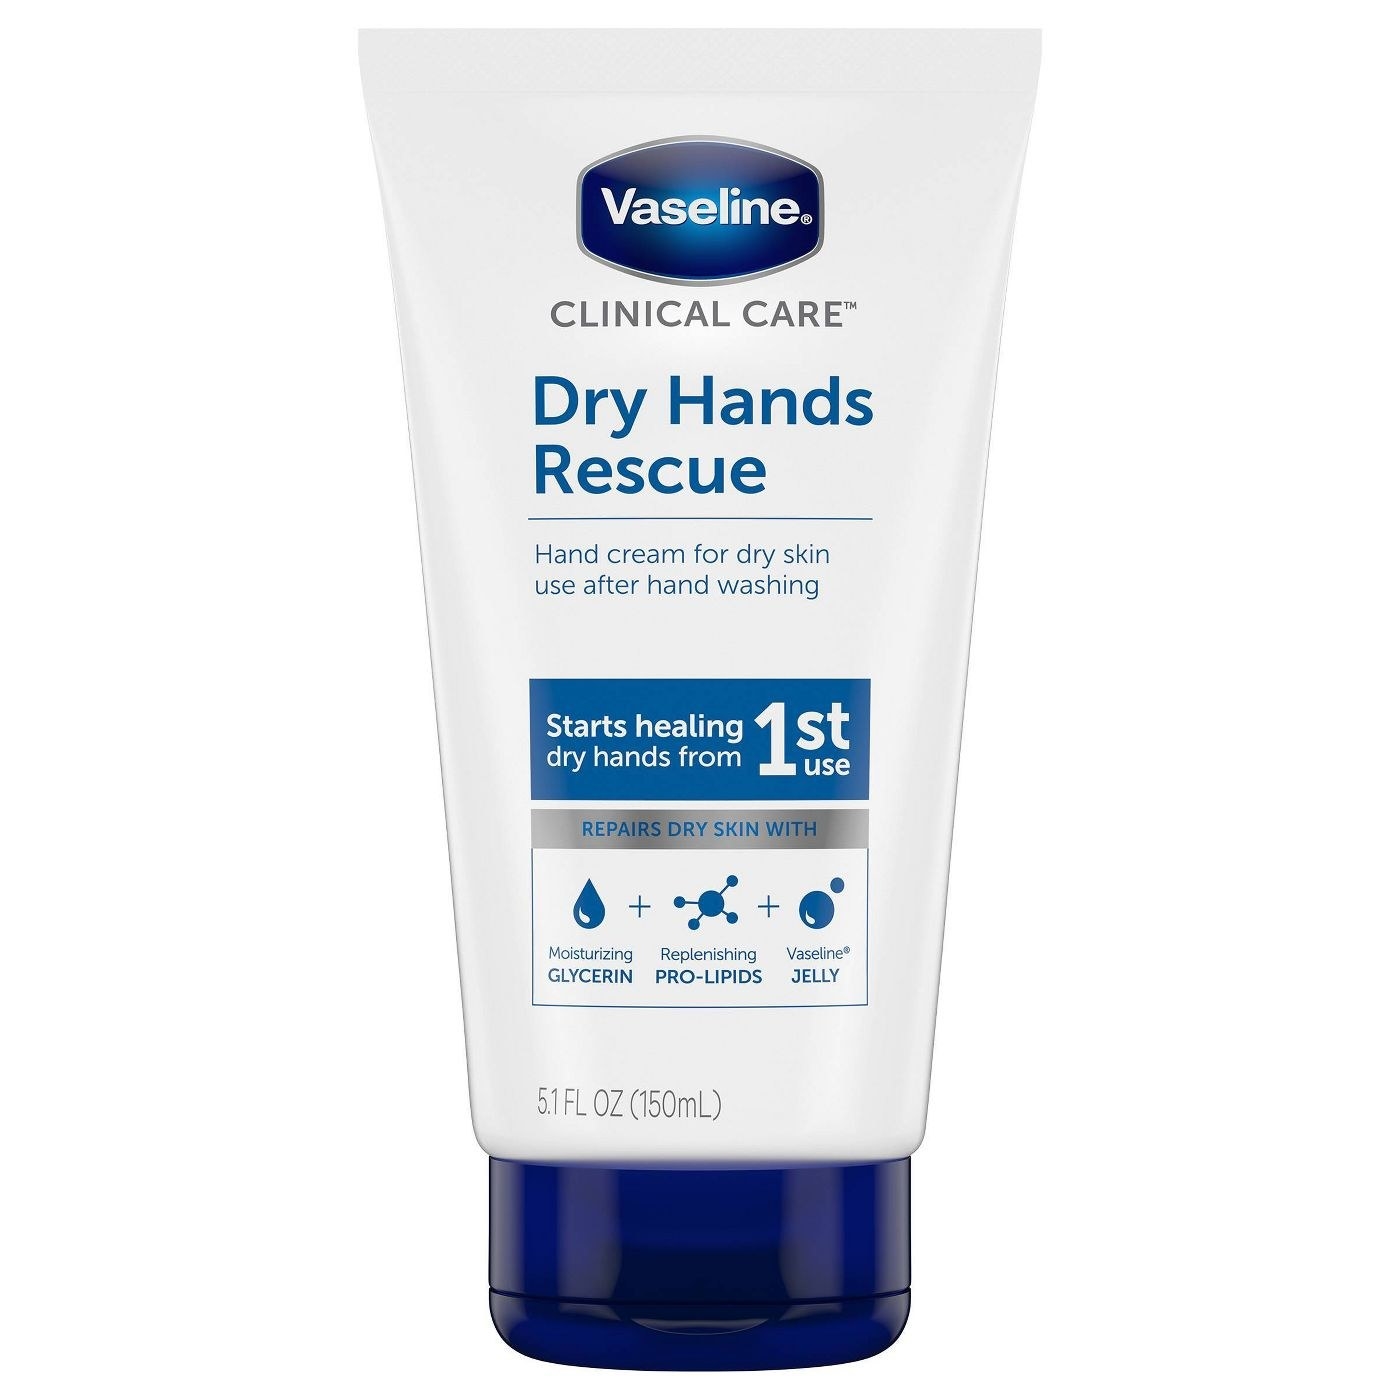 The Vaseline dry hands rescue lotion